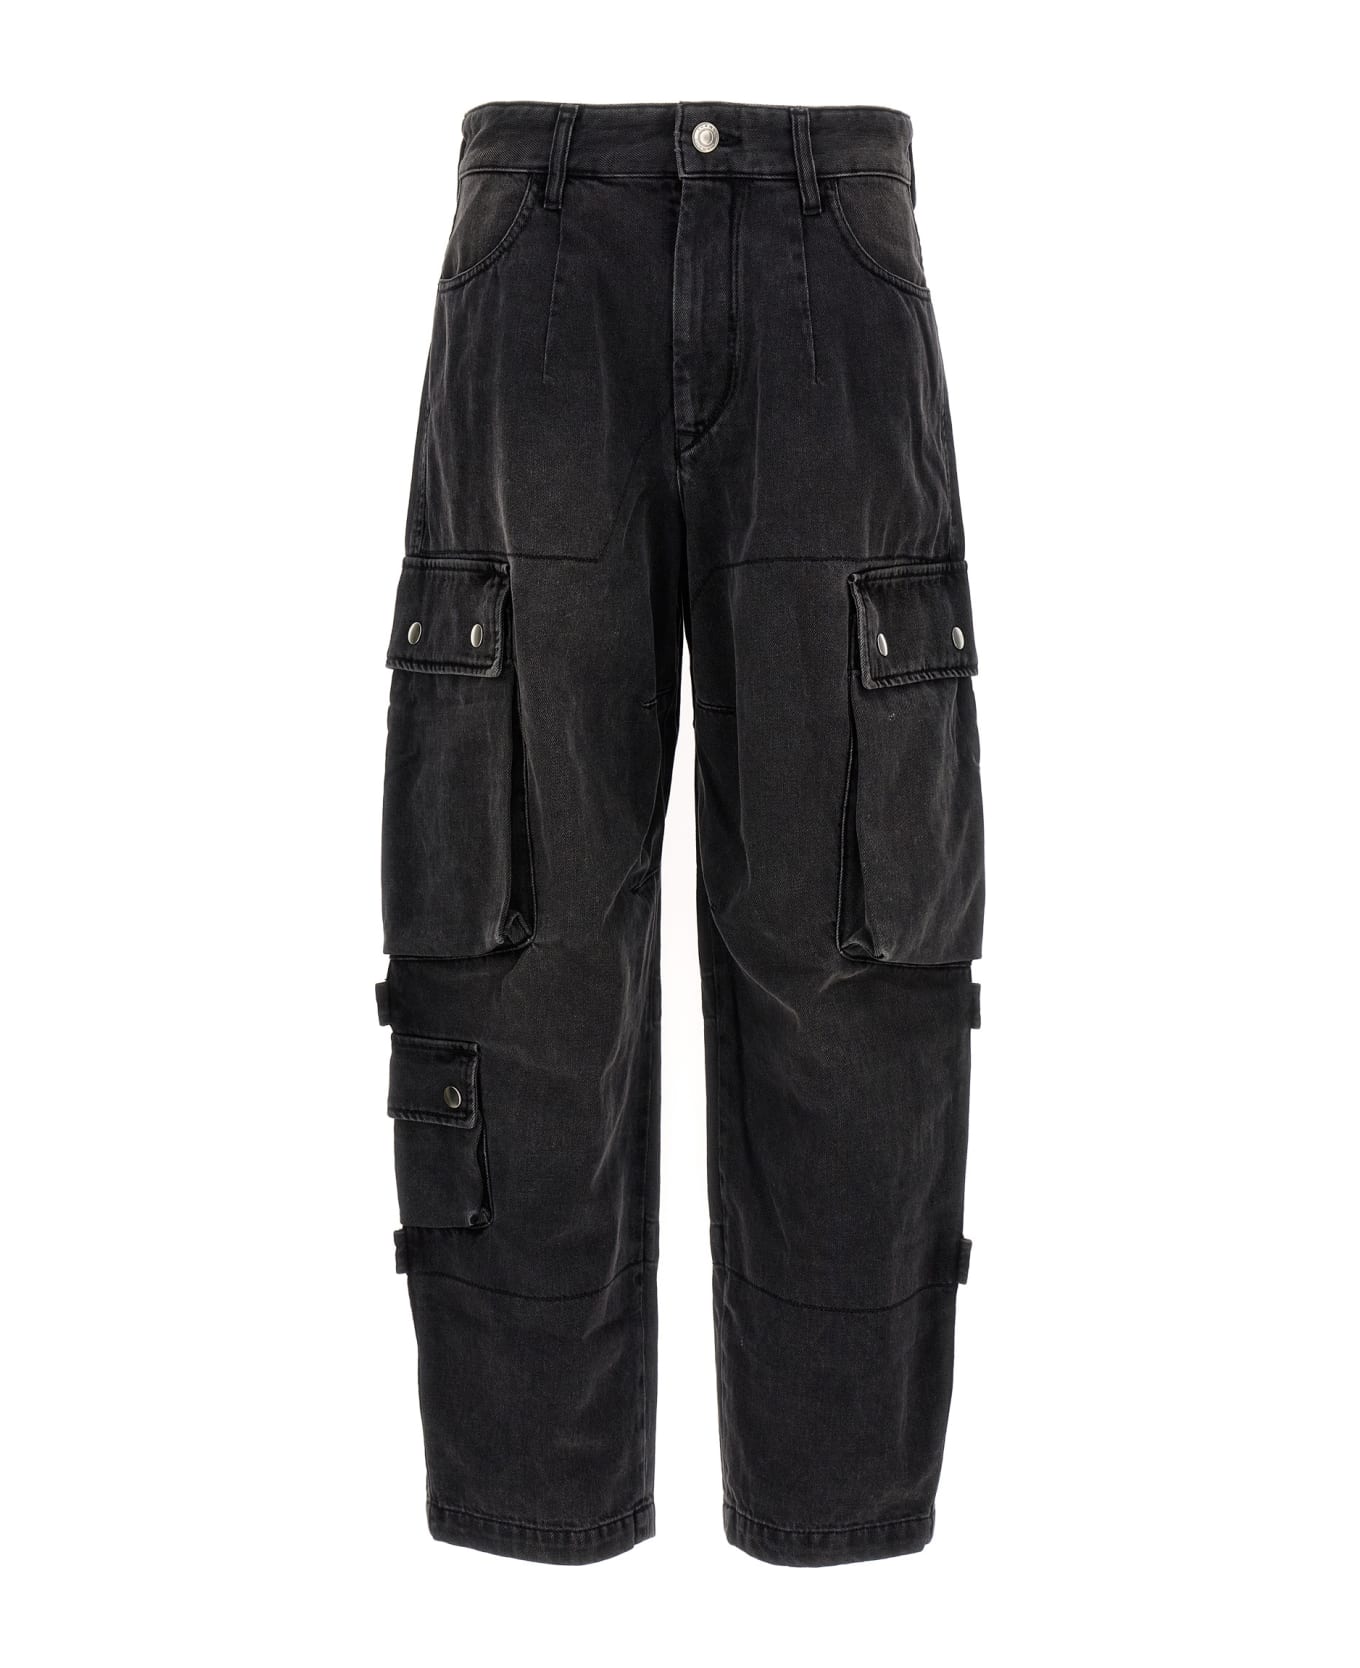 Isabel Marant Elore Cargo Jeans - FADED BLACK ボトムス